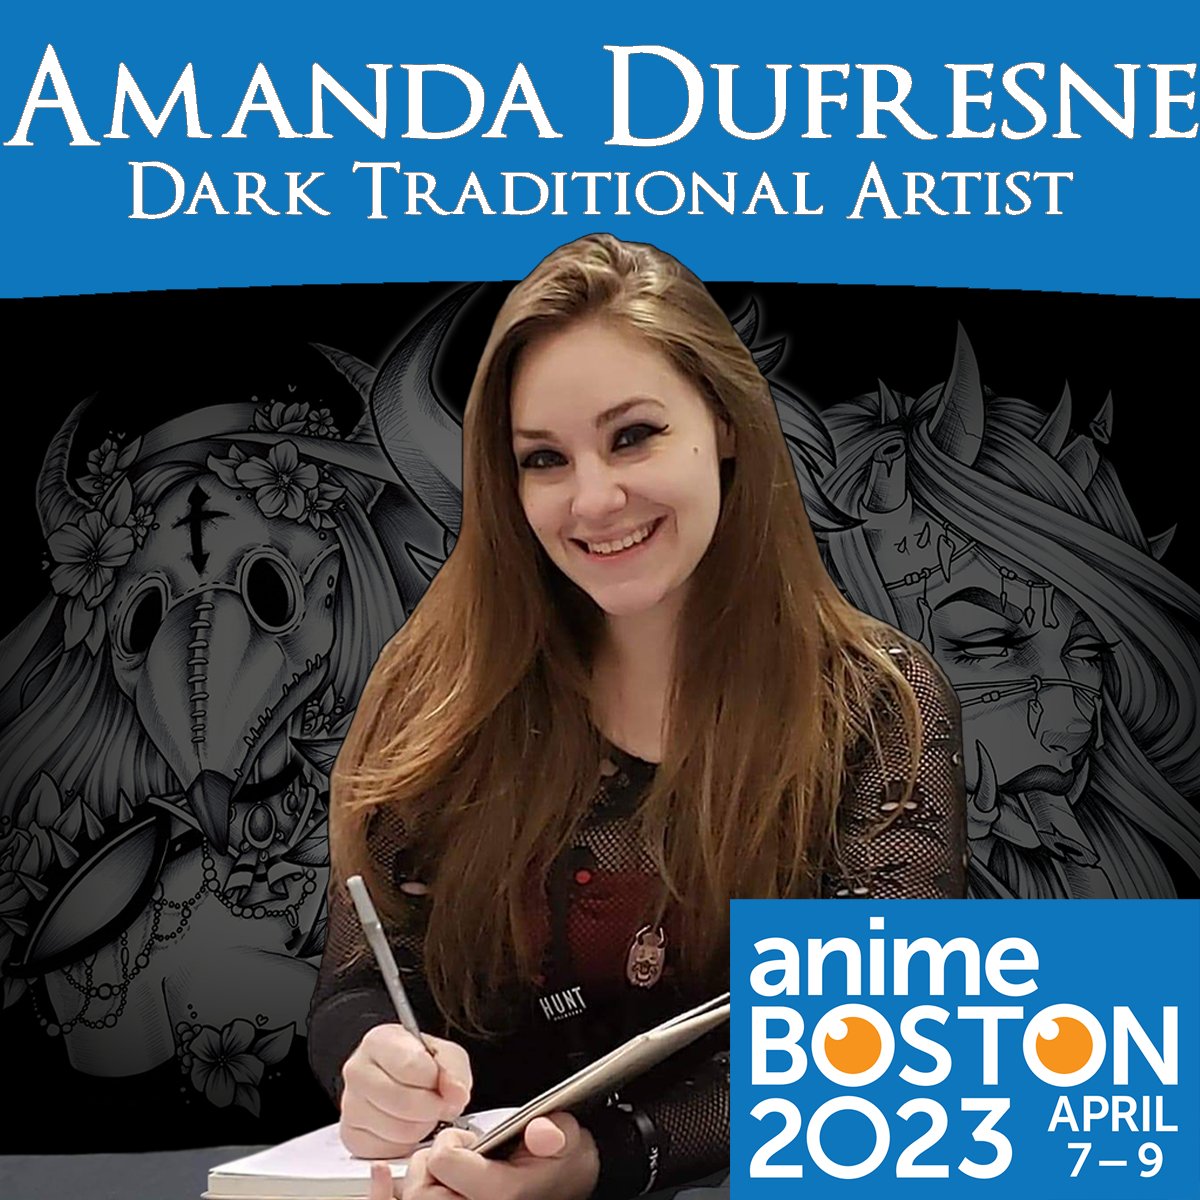 Hey look! Another event.. for those of you who can't make the vampire freaks event, there's another chance right in Boston MA. Come say hi and get your weeb on @AnimeBoston #conlife